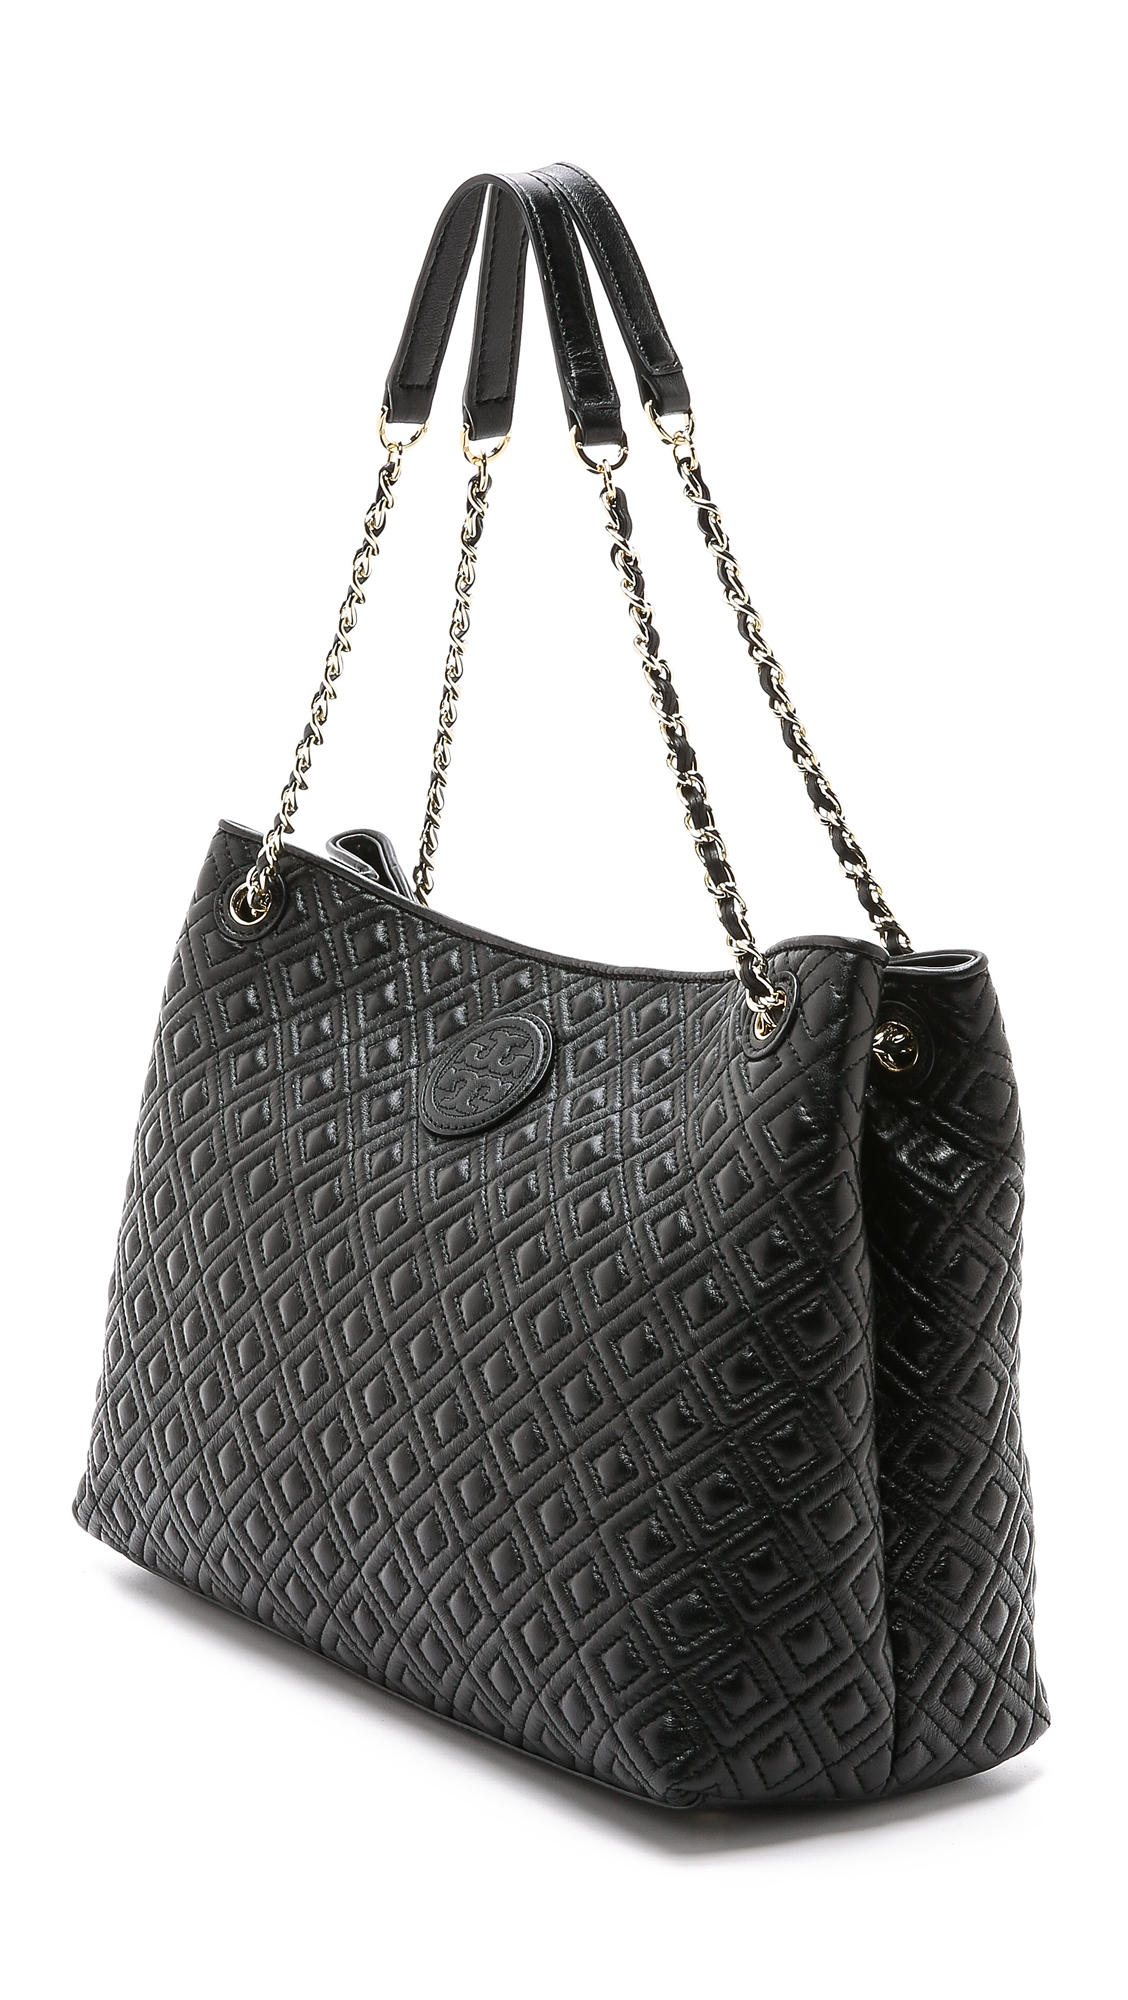 Lyst - Tory Burch Marion Quilted Tote - Black in Black